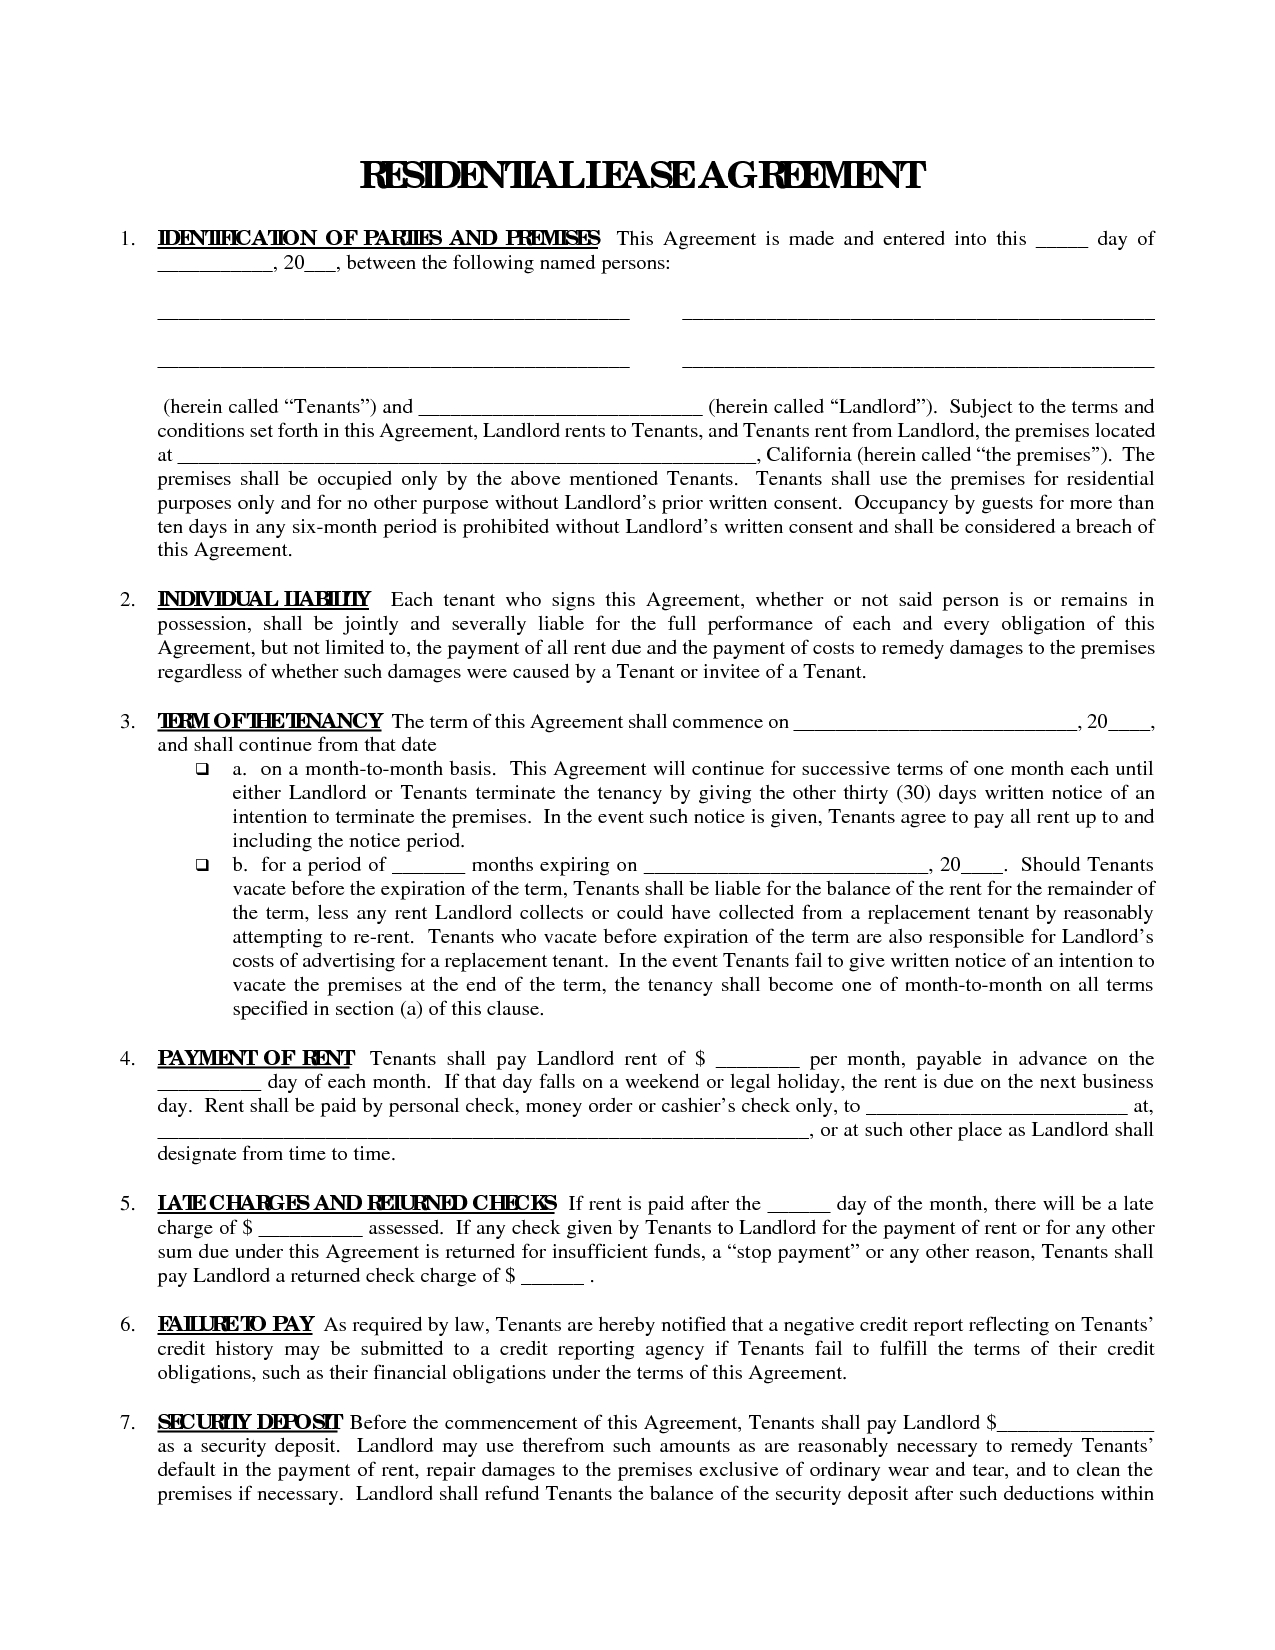 Printable Residential Free House Lease Agreement | Residential Lease - Blank Lease Agreement Free Printable